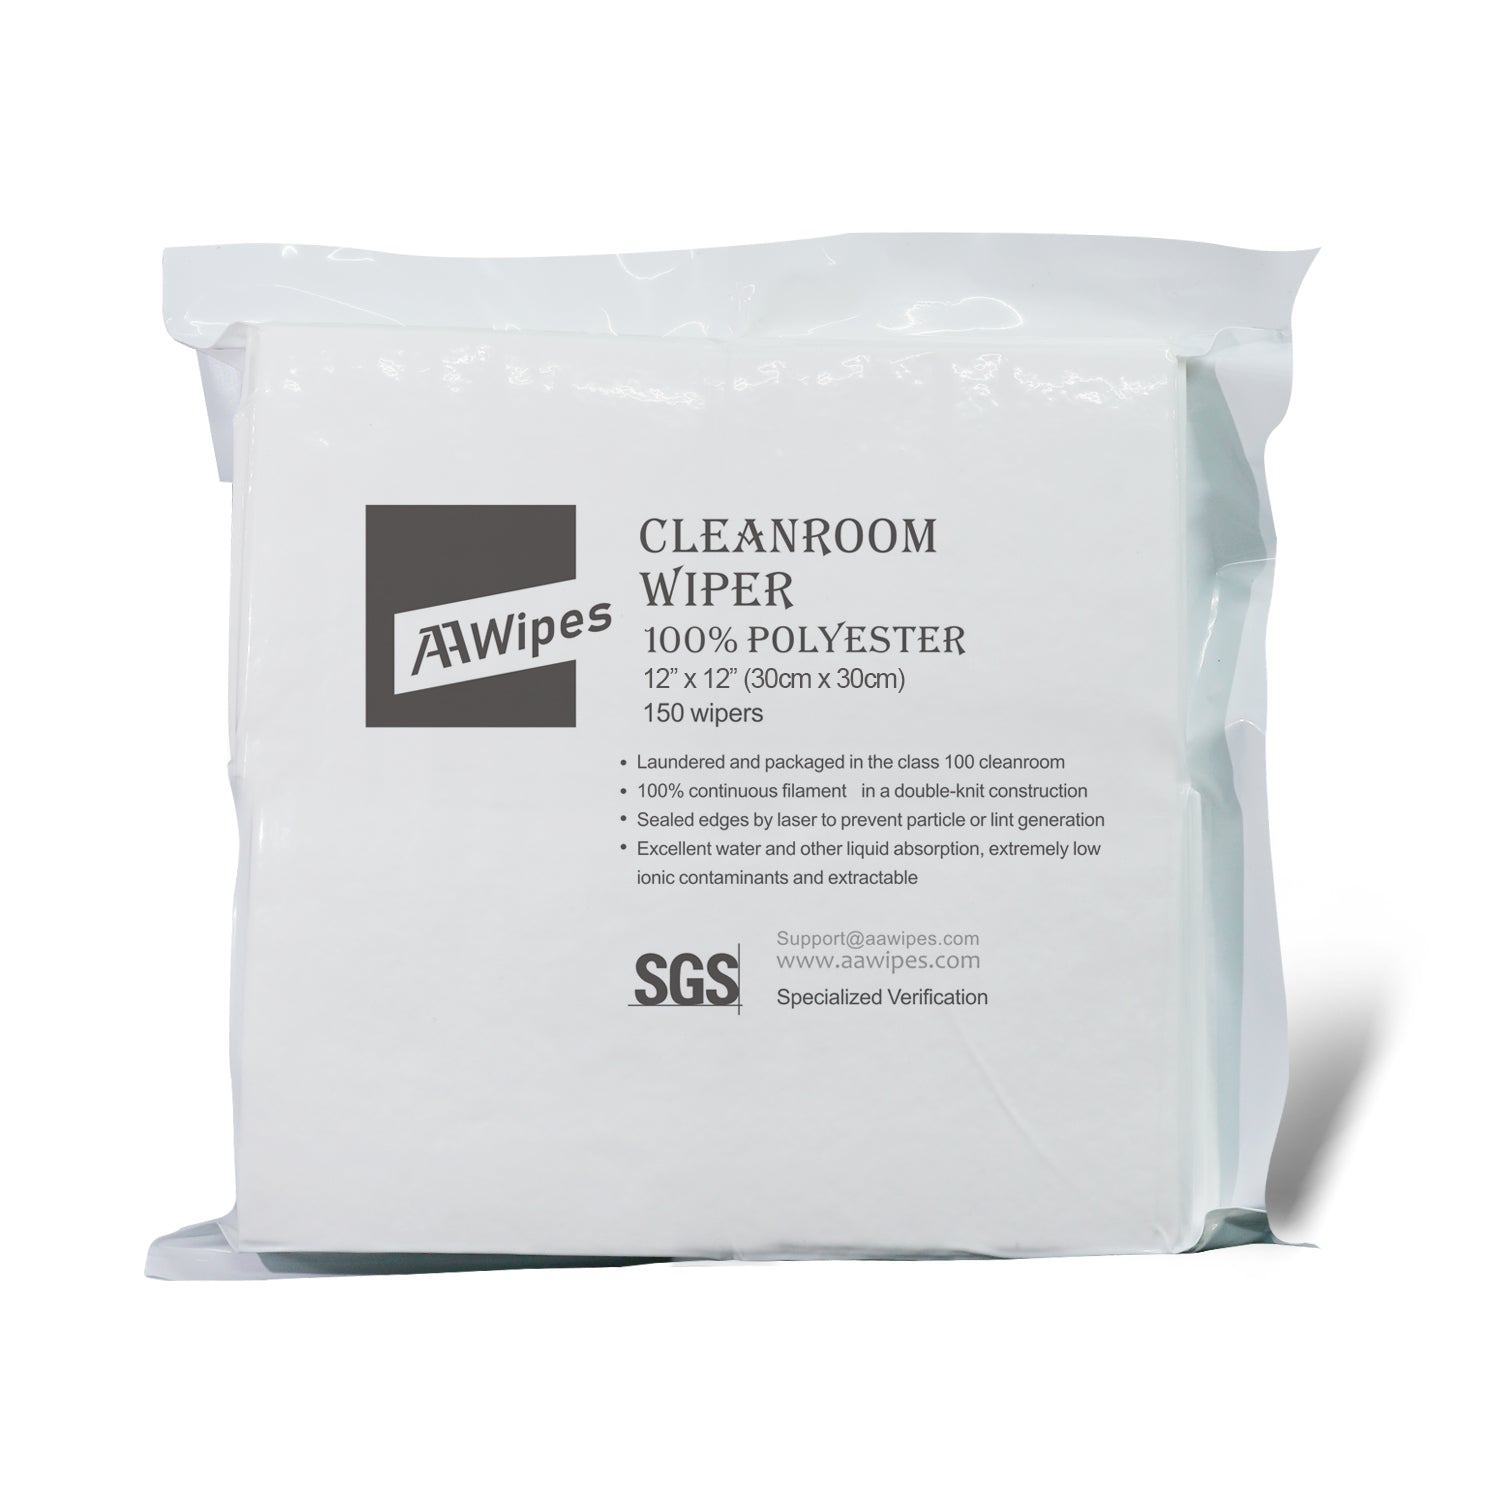 Cleanroom Wipes 12"x12"Double Knit 100% Polyester Wipers Lint Free Cloths with Ultra-fine Filaments, Laser Sealed Edge, Class 10-100 Cloths, ISO 4-5, Ultra-Soft Wipes for Lab Biotech. 1,200 wipes/box, 8 bags (No. CP14012).